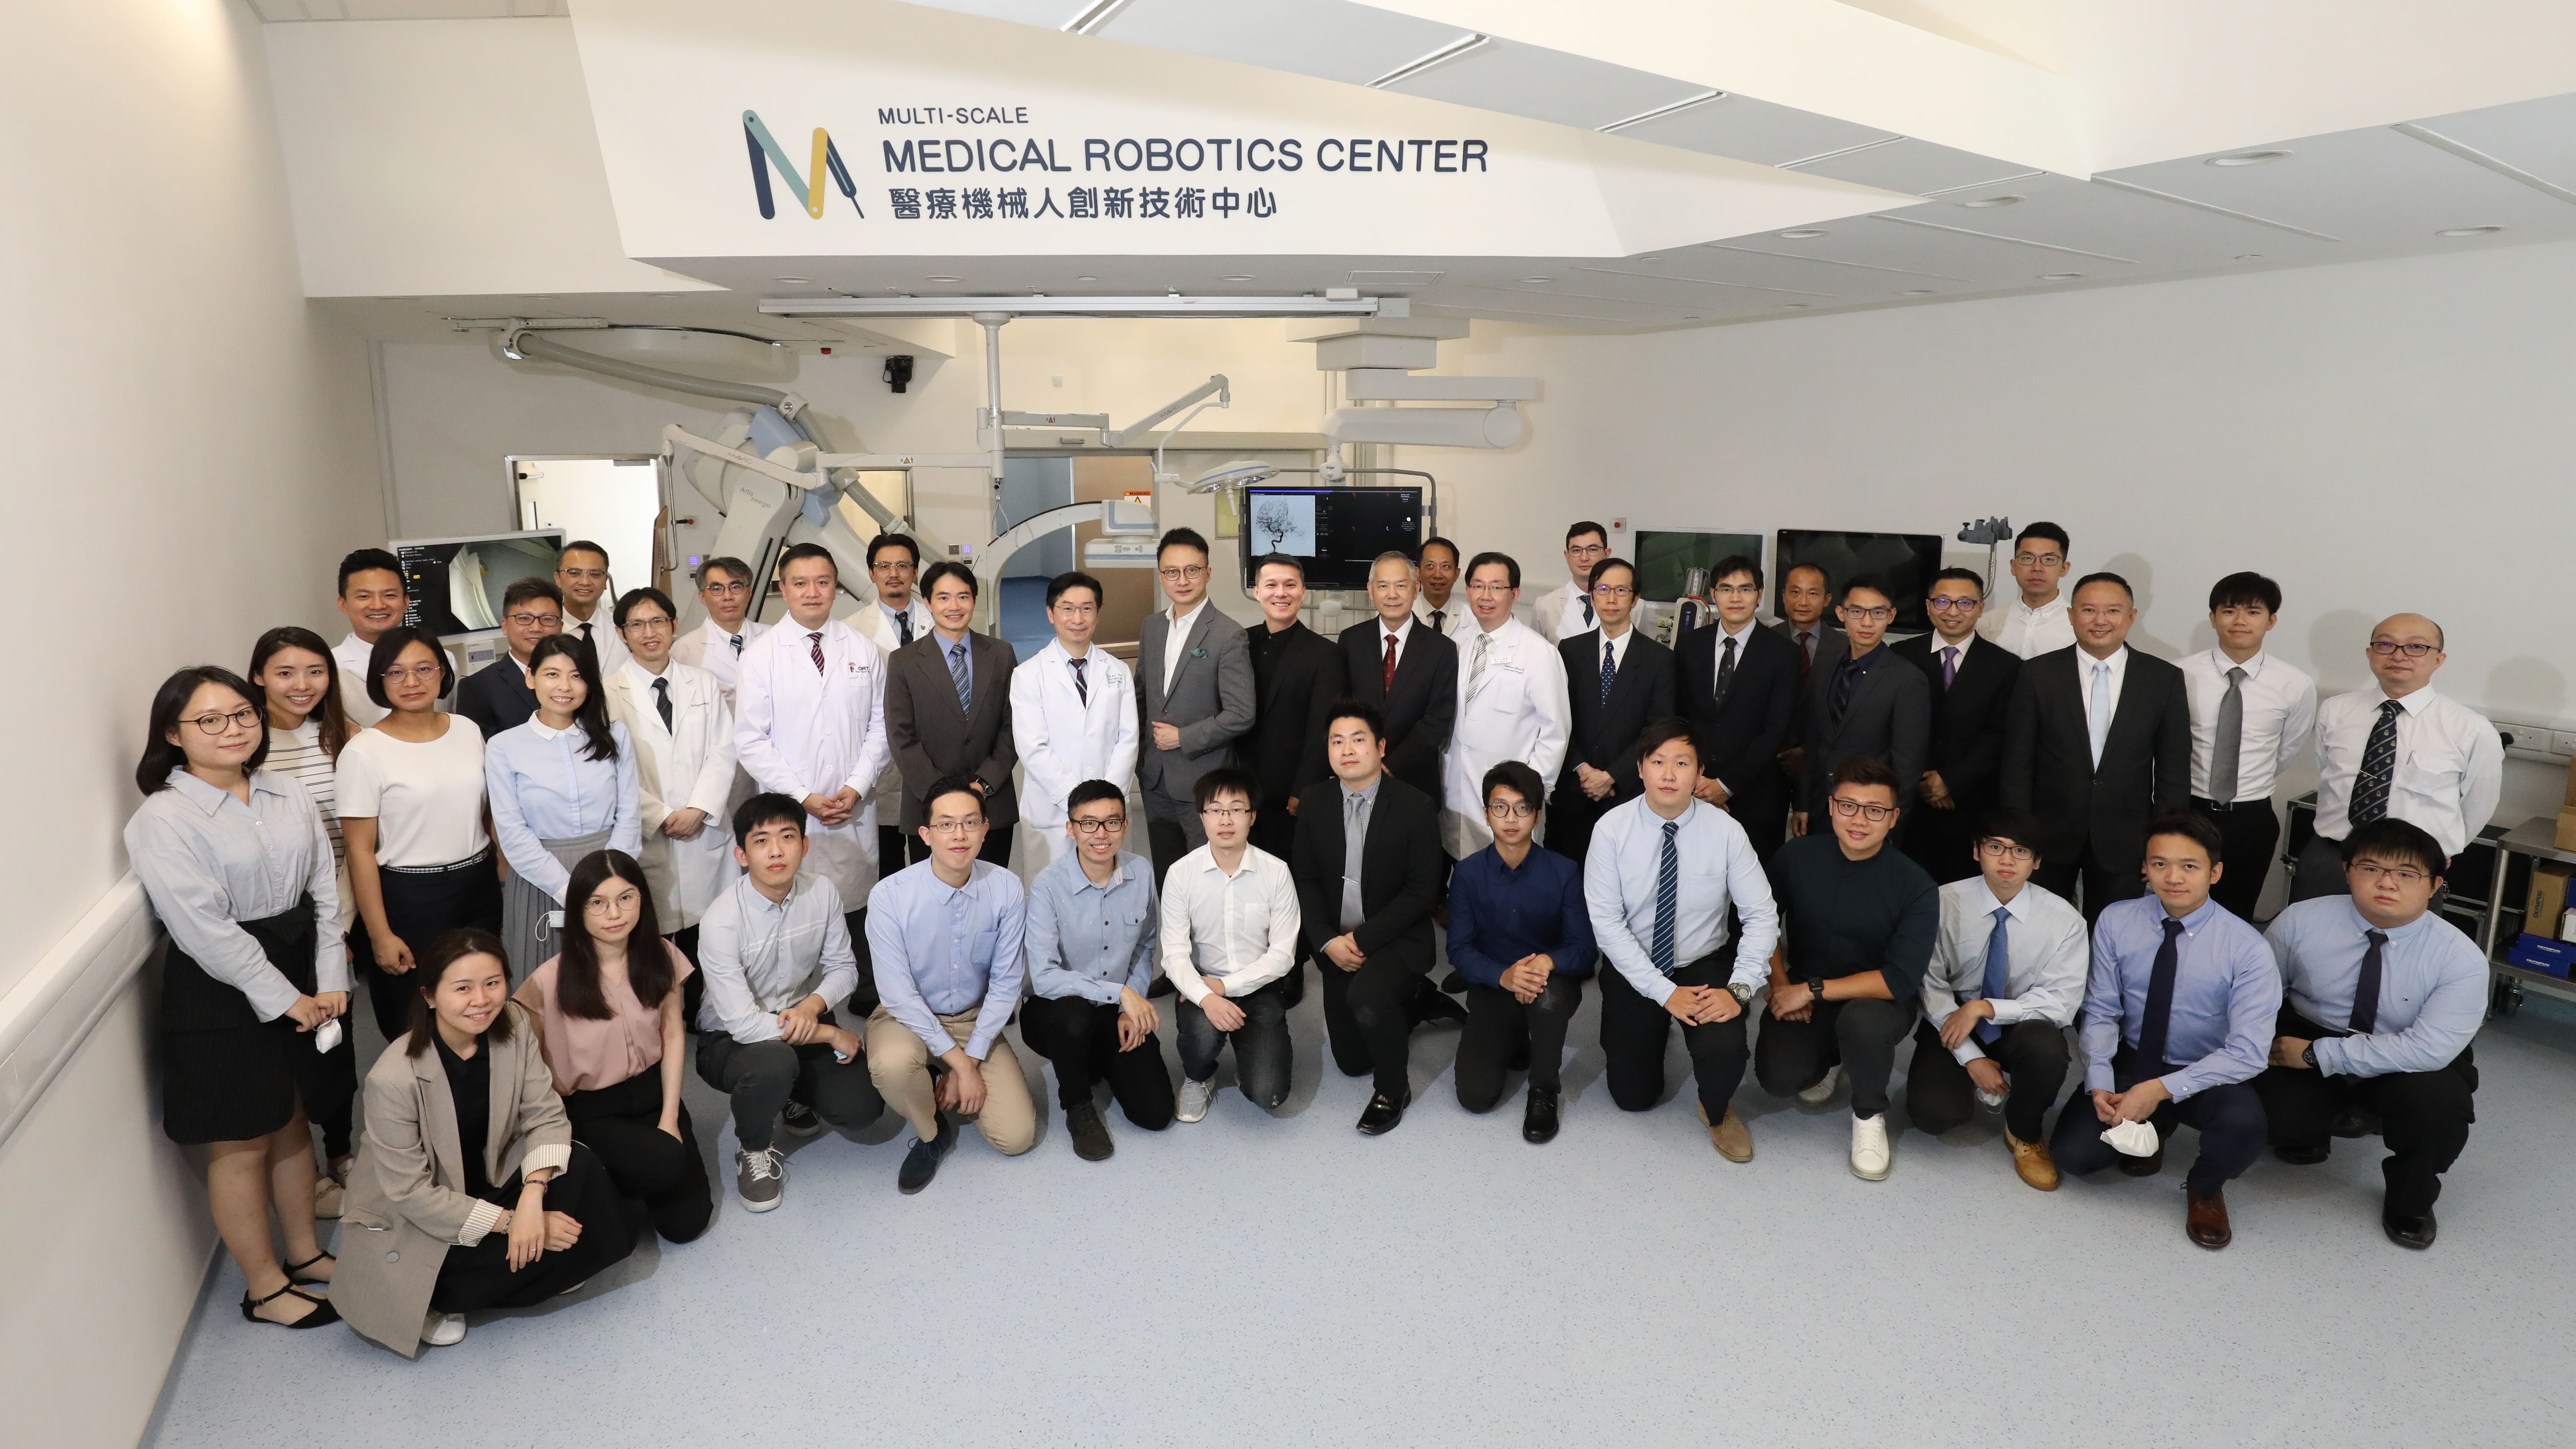 Local clinicians, professors, investigators, engineers, research project teams, business and administration teams of MRC are in collaboration with three top-notch overseas institutions to develop effective and accessible imaging and robotic technologies.